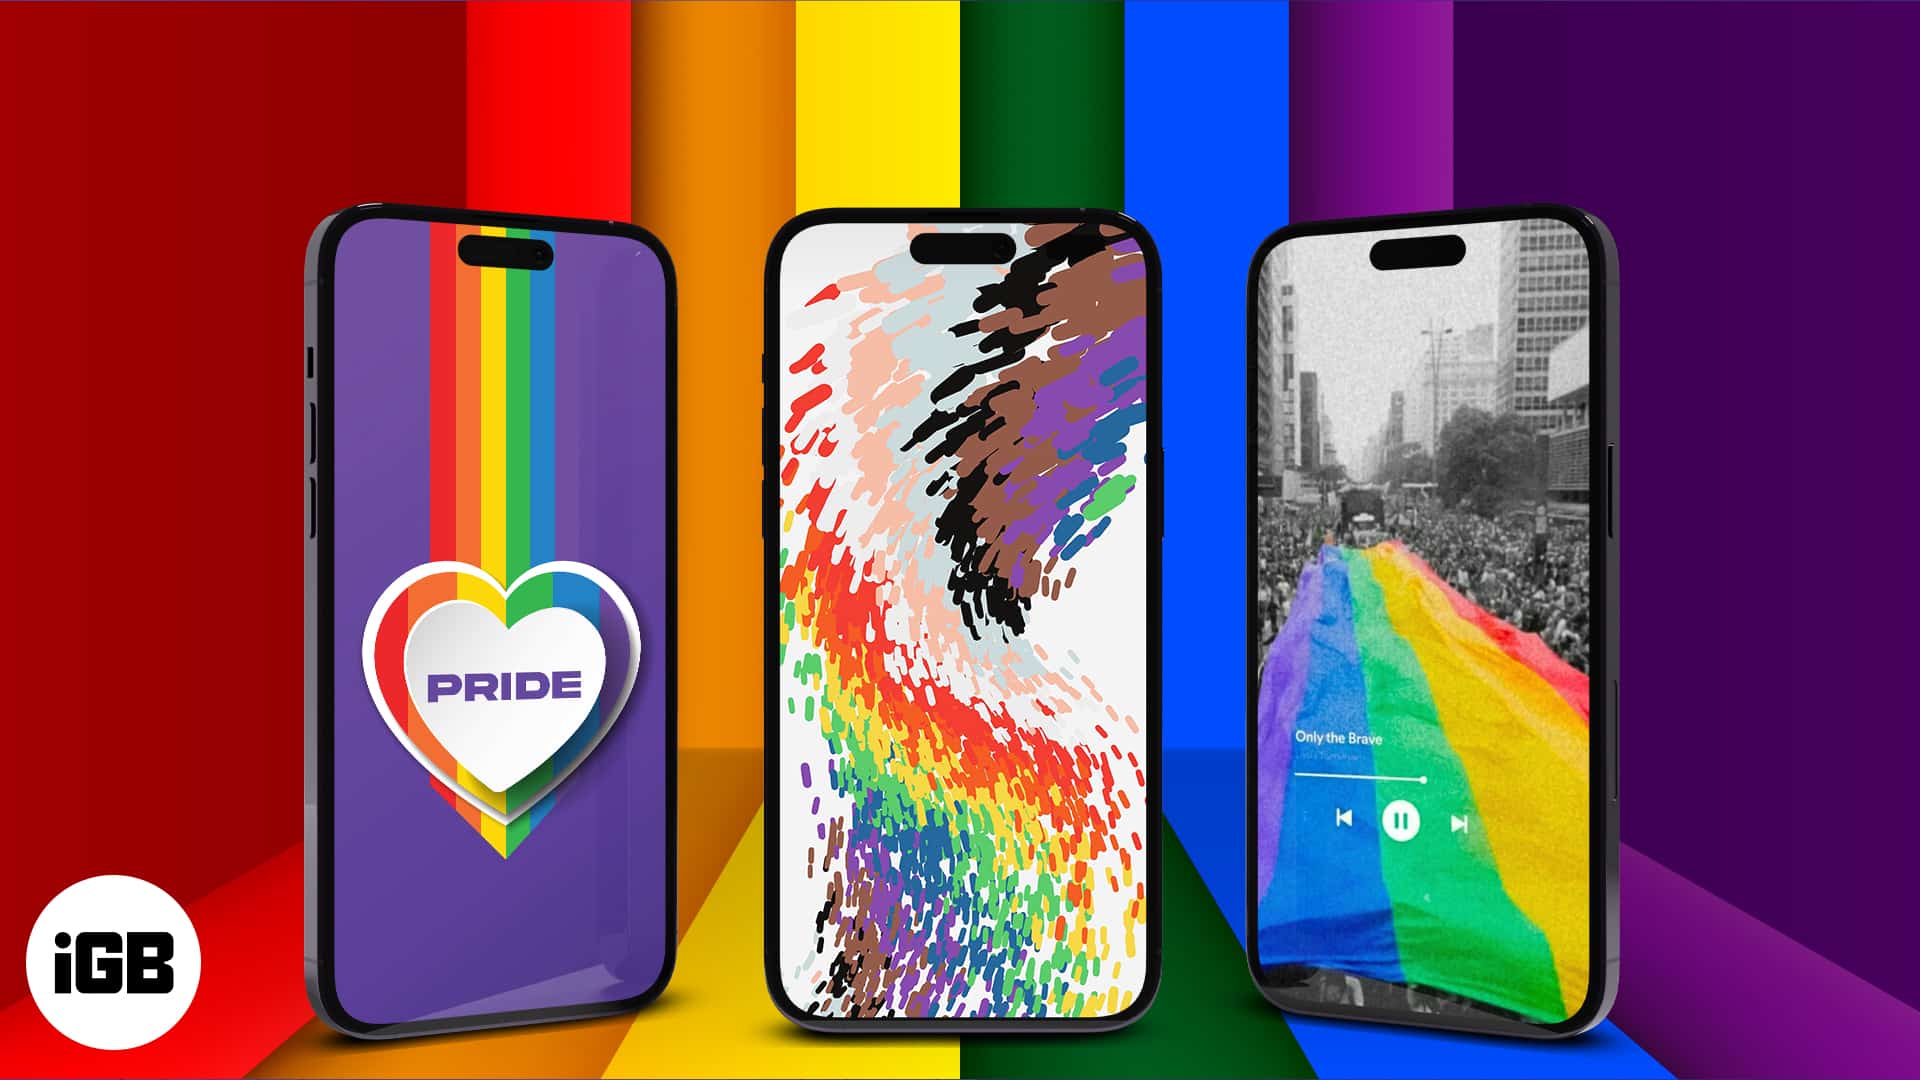 Download Pride wallpaper for iPhone in 2023